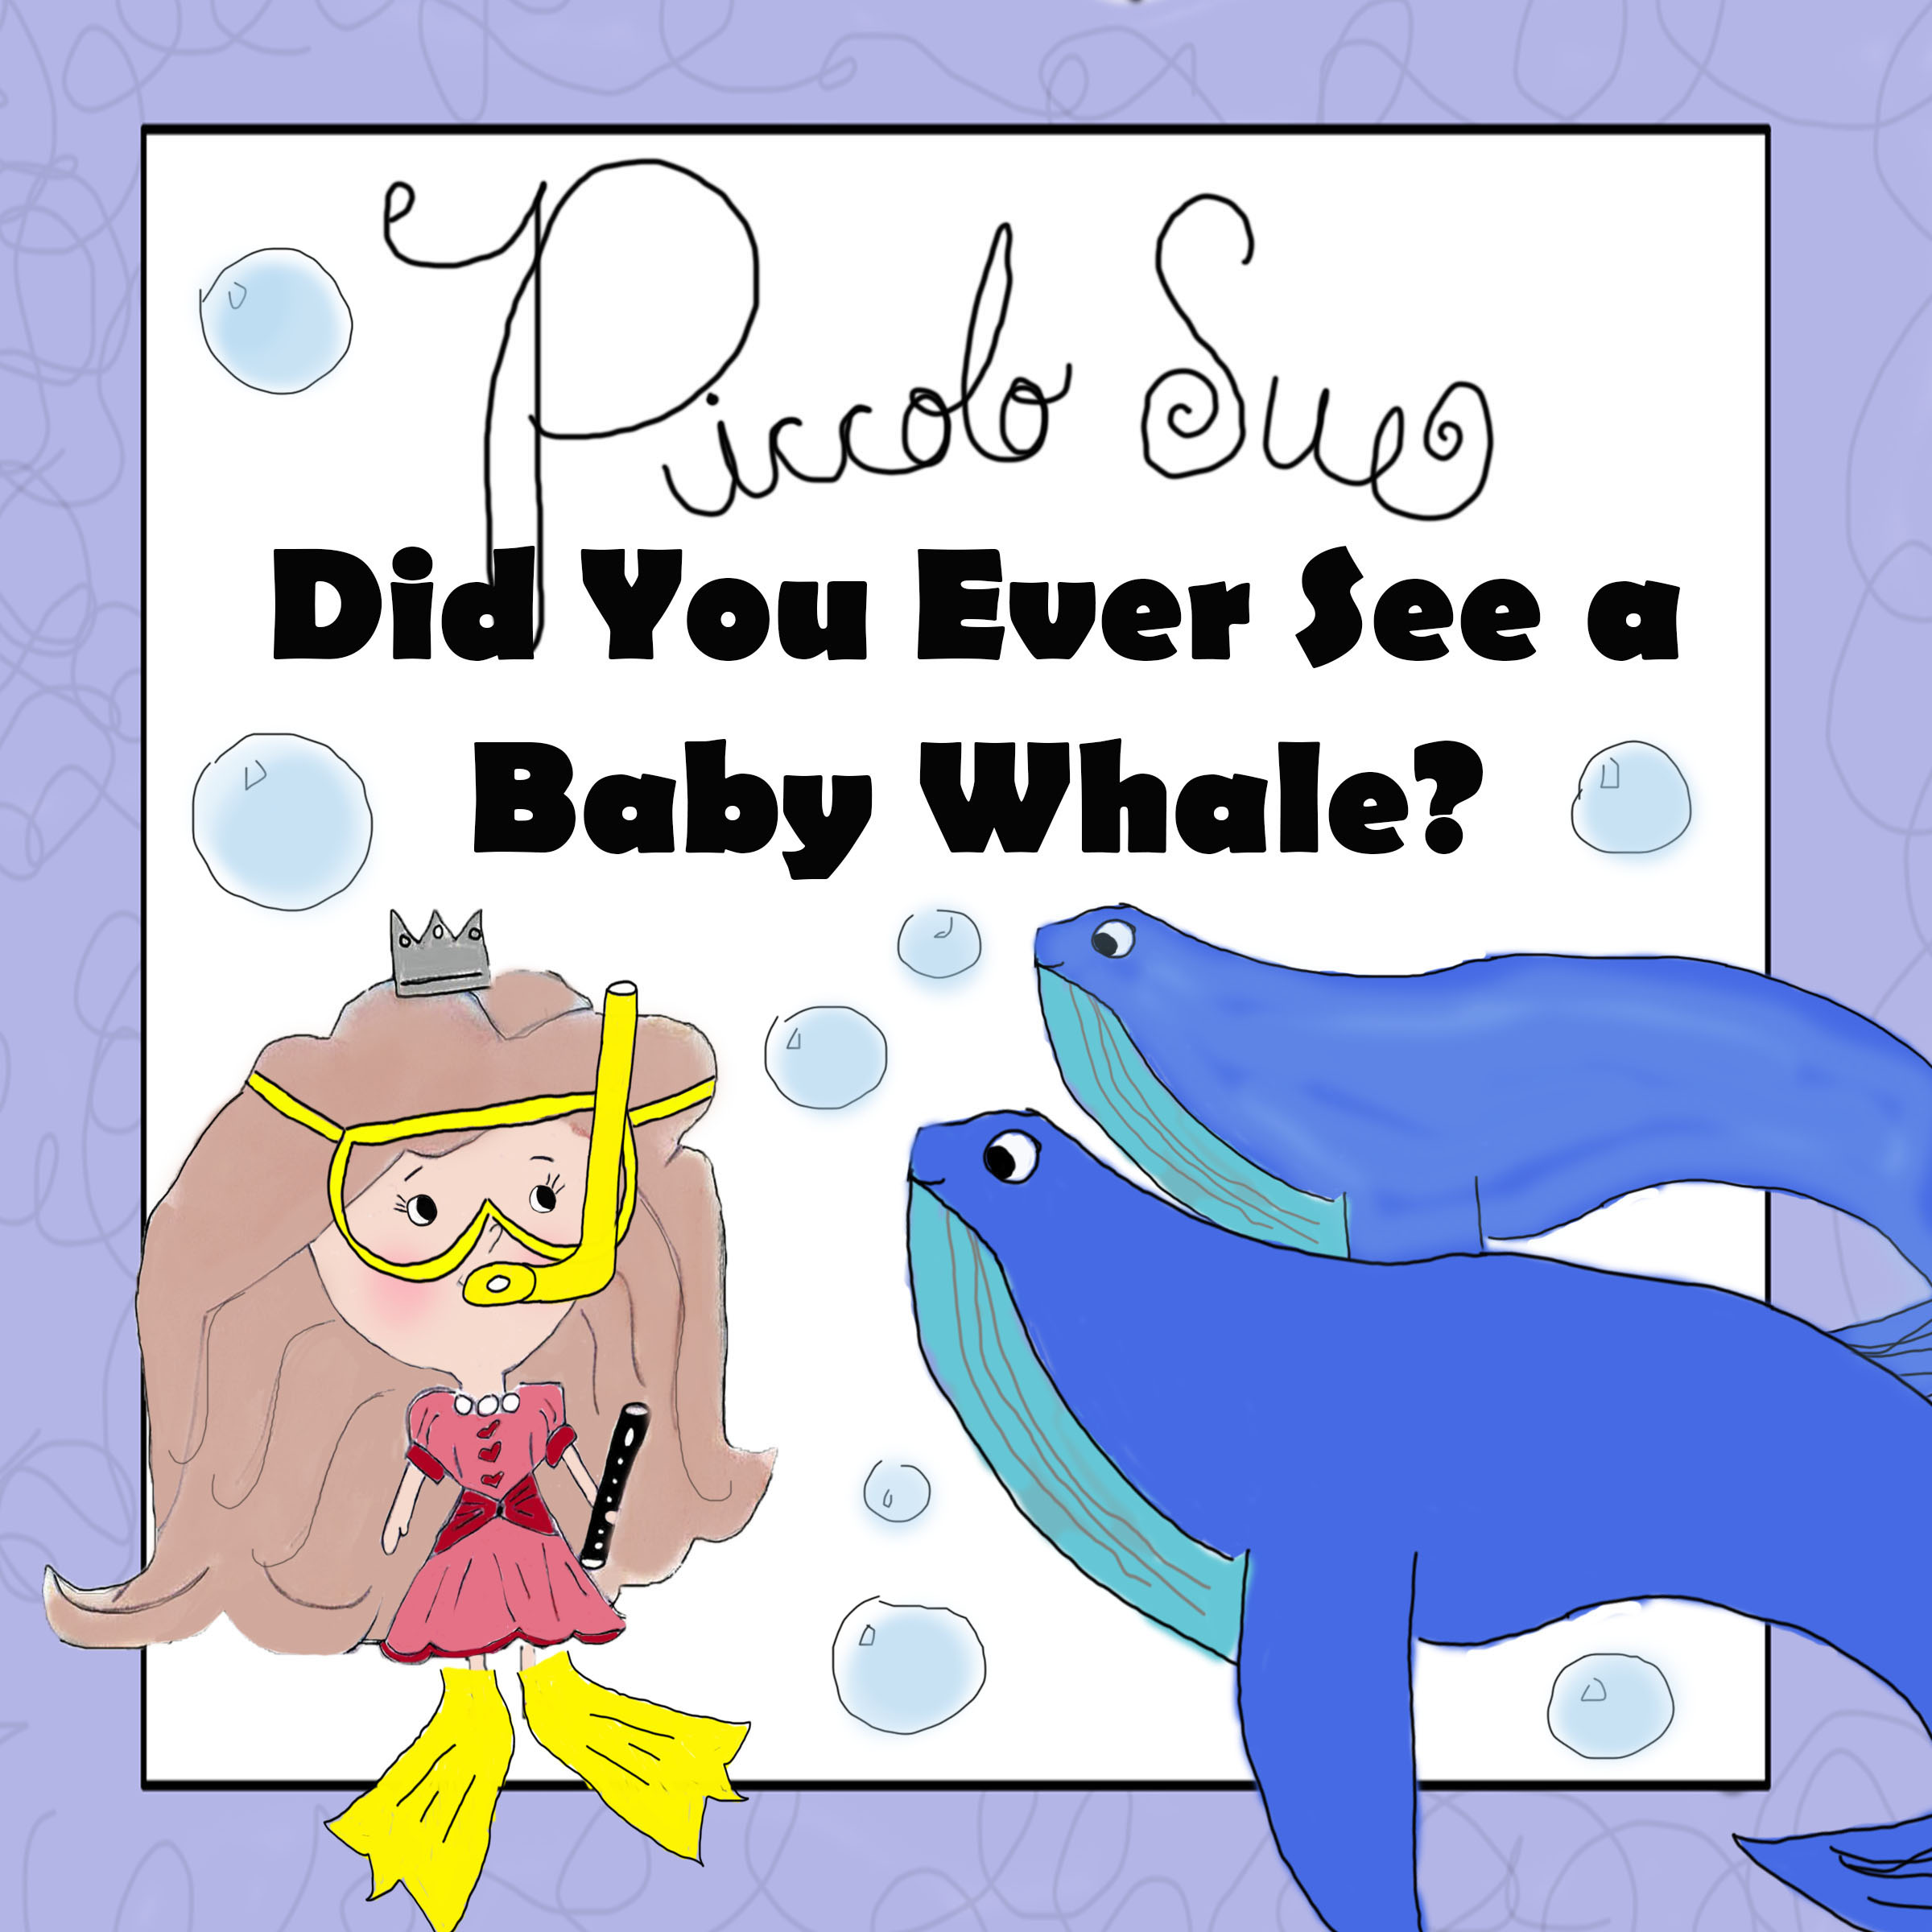 Song VIDEO: Did You Ever See a Baby Whale?